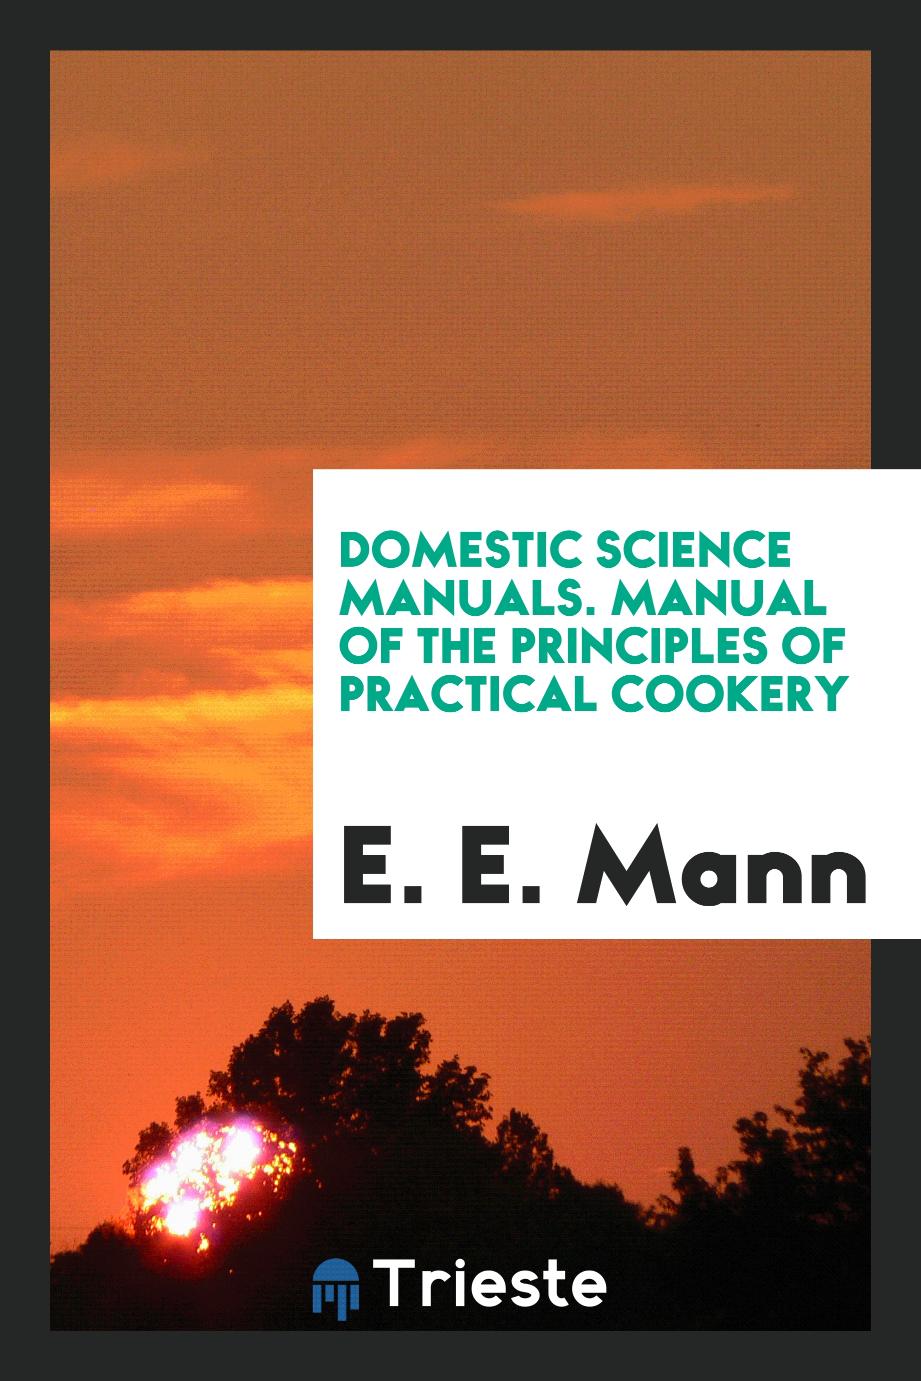 Domestic Science Manuals. Manual of the Principles of Practical Cookery